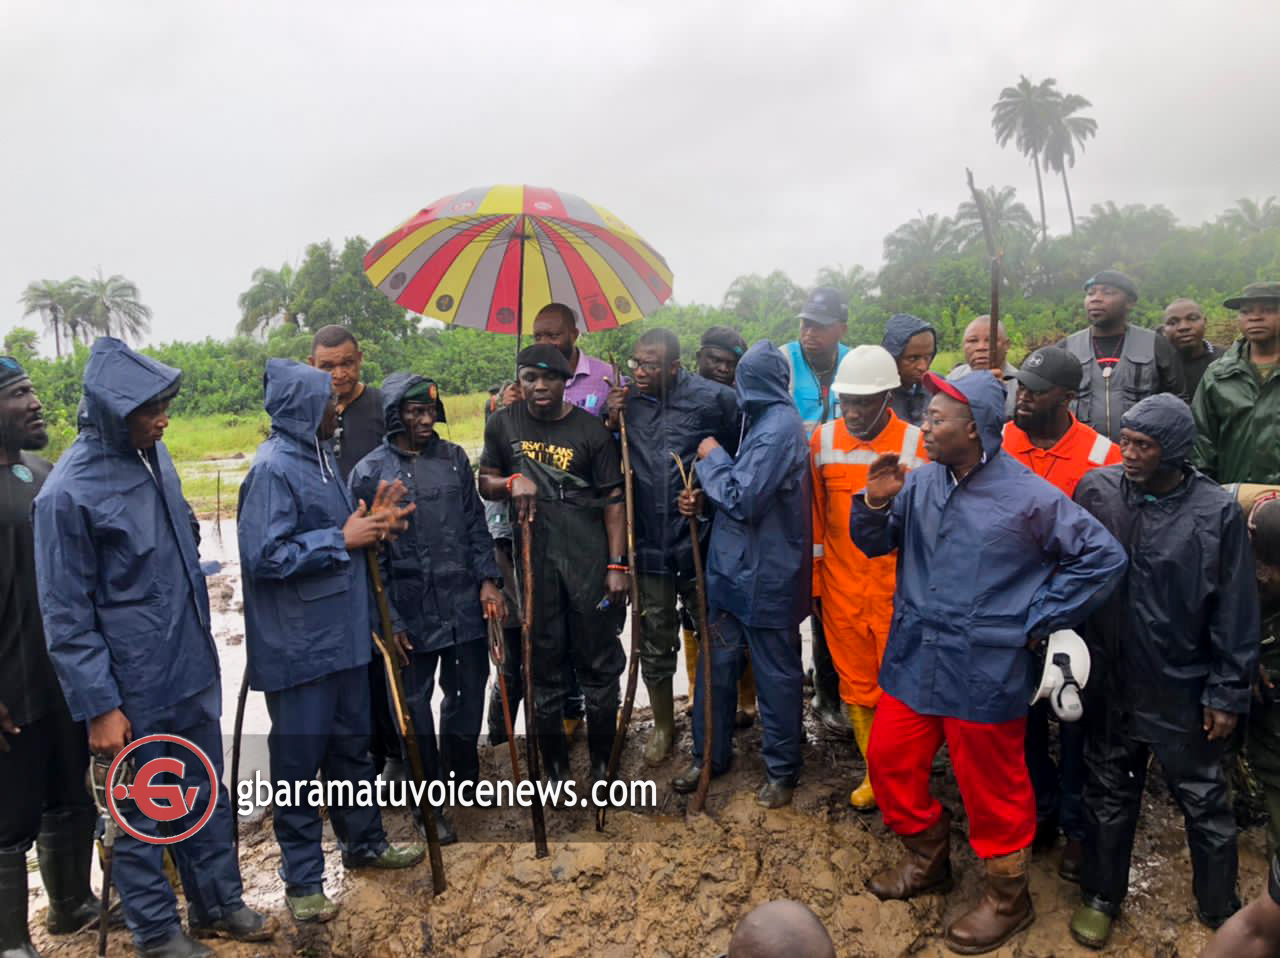 [PHOTOS] Mele Kyari, Chief of Defence Staff visit site of discovered illegal oil pipeline in Delta